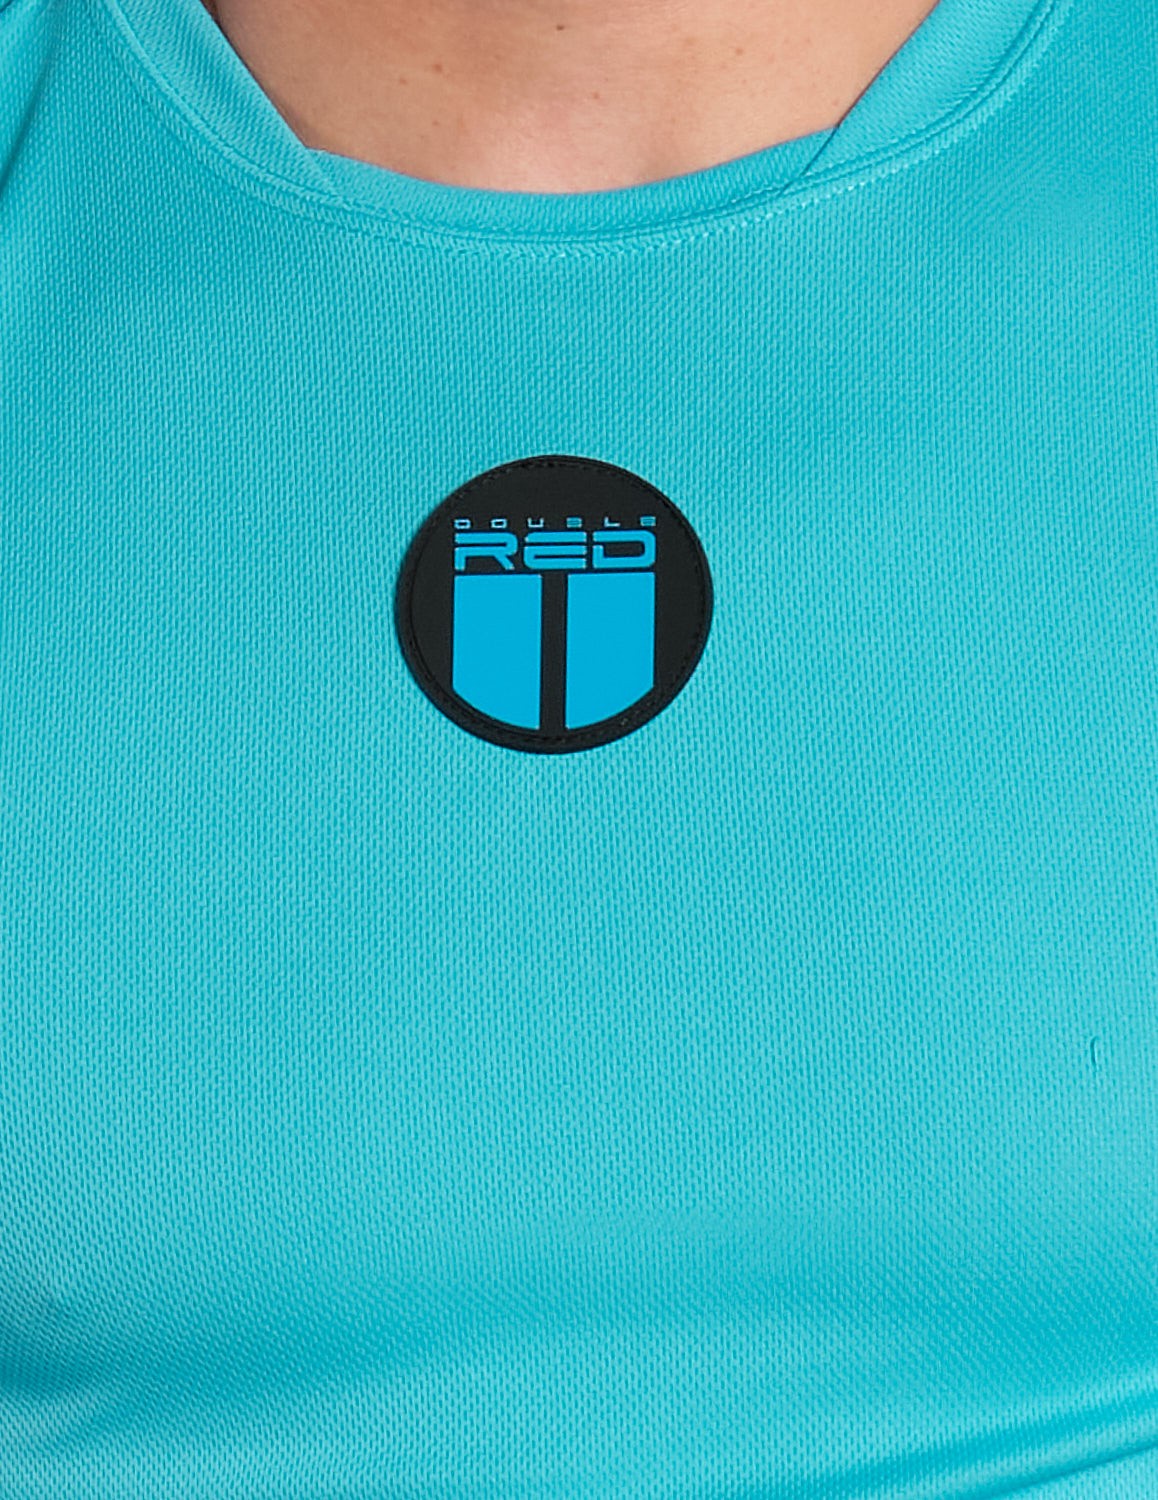 T-shirt SPORT IS YOUR GANG™ FIT+ Turquoise